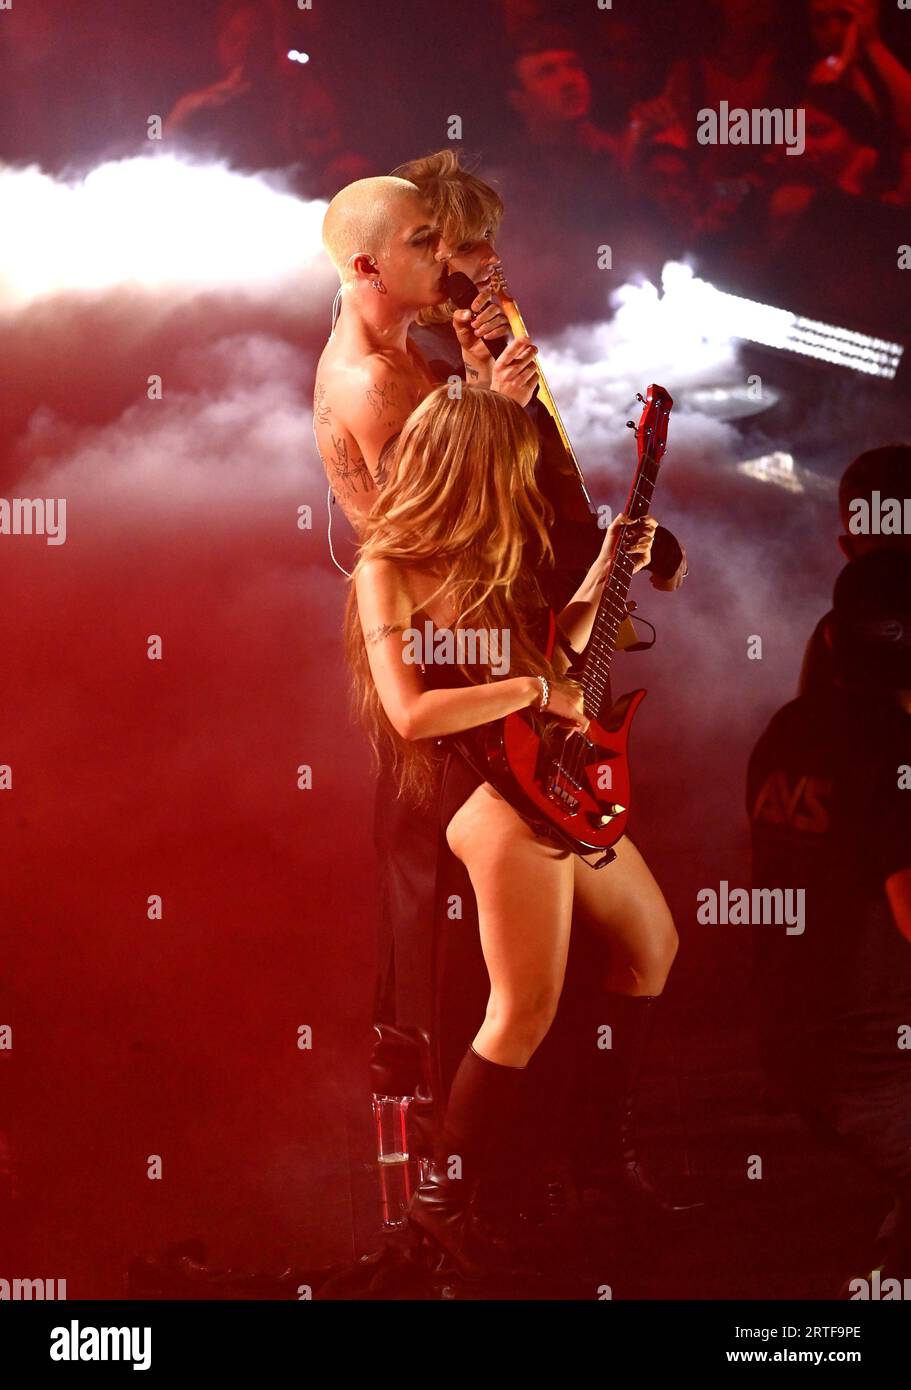 Damiano David, Thomas Raggi and Victoria De Angelis of Maneskin perform on stage at the MTV Video Music Awards 2023 held at the Prudential Center in Newark, New Jersey. Picture date: Tuesday September 12, 2023. Stock Photo